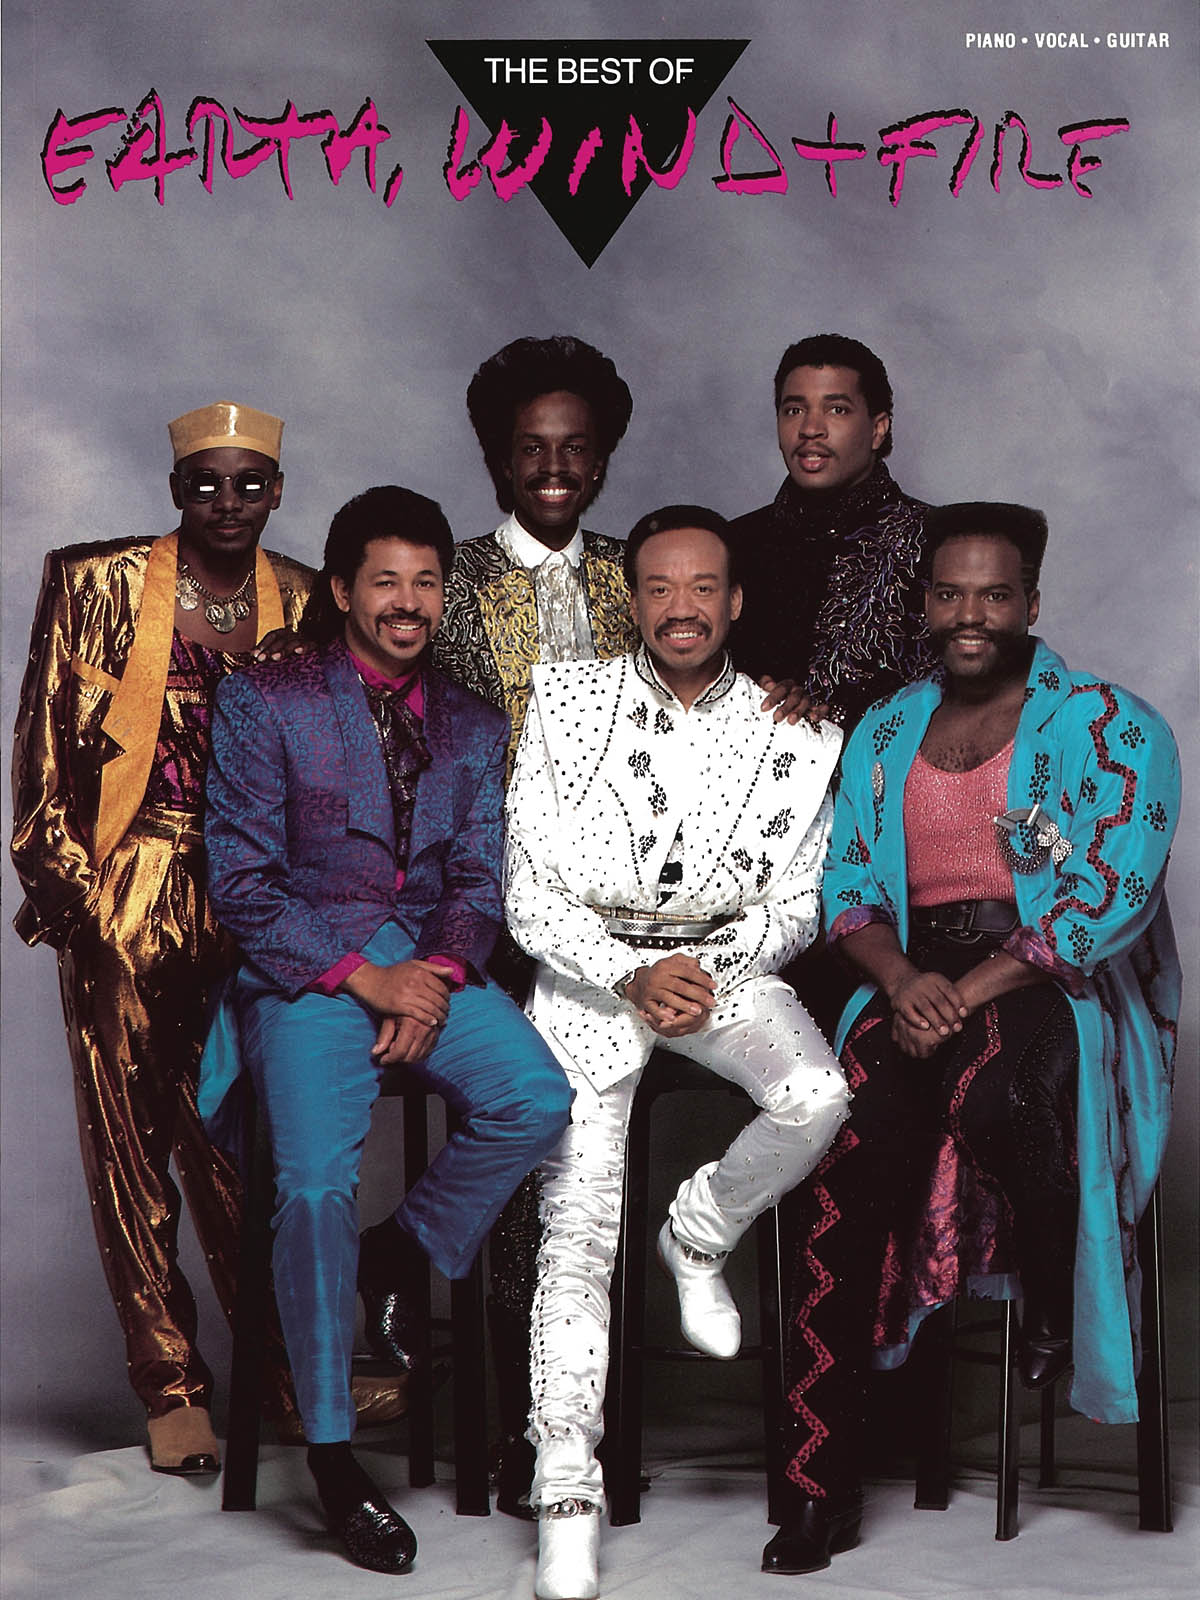 The Best Of Earth, Wind And Fire(PVG)